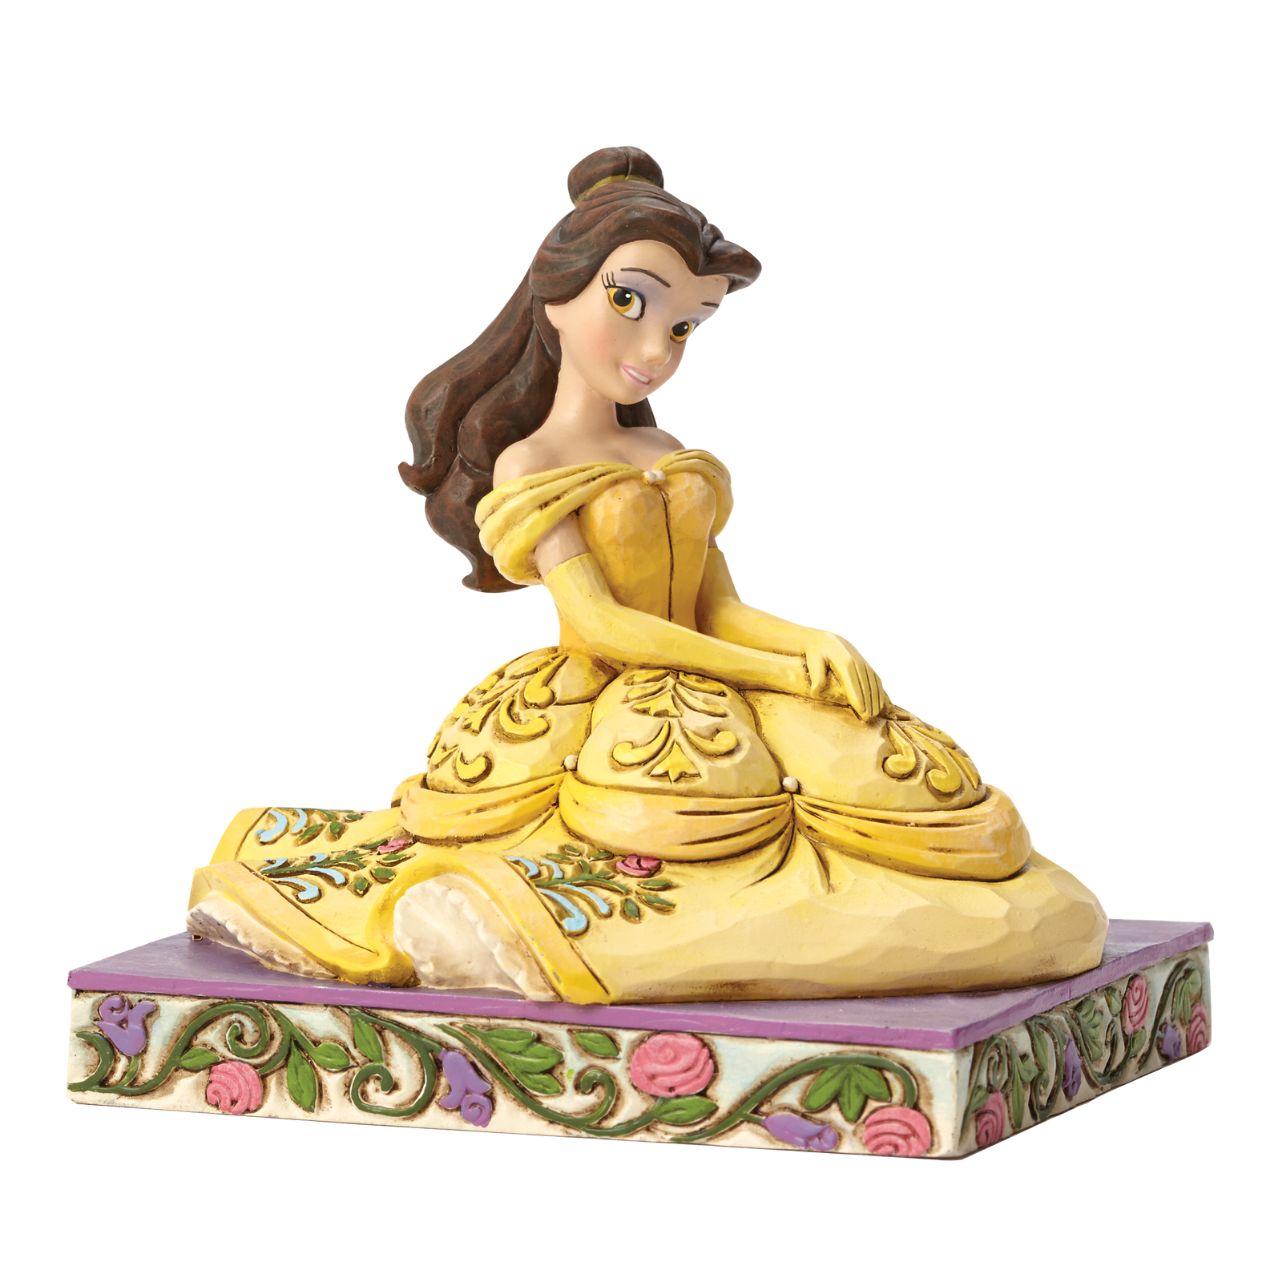 Disney Traditions Be Kind Belle Figurine by Jim Shore  Dressed for the ball in a golden gown decorated in exquisite detail, the striking personality pose from artist Jim Shore depicts the radiant beauty of Belle from the Disney classic Beauty and the Beast.